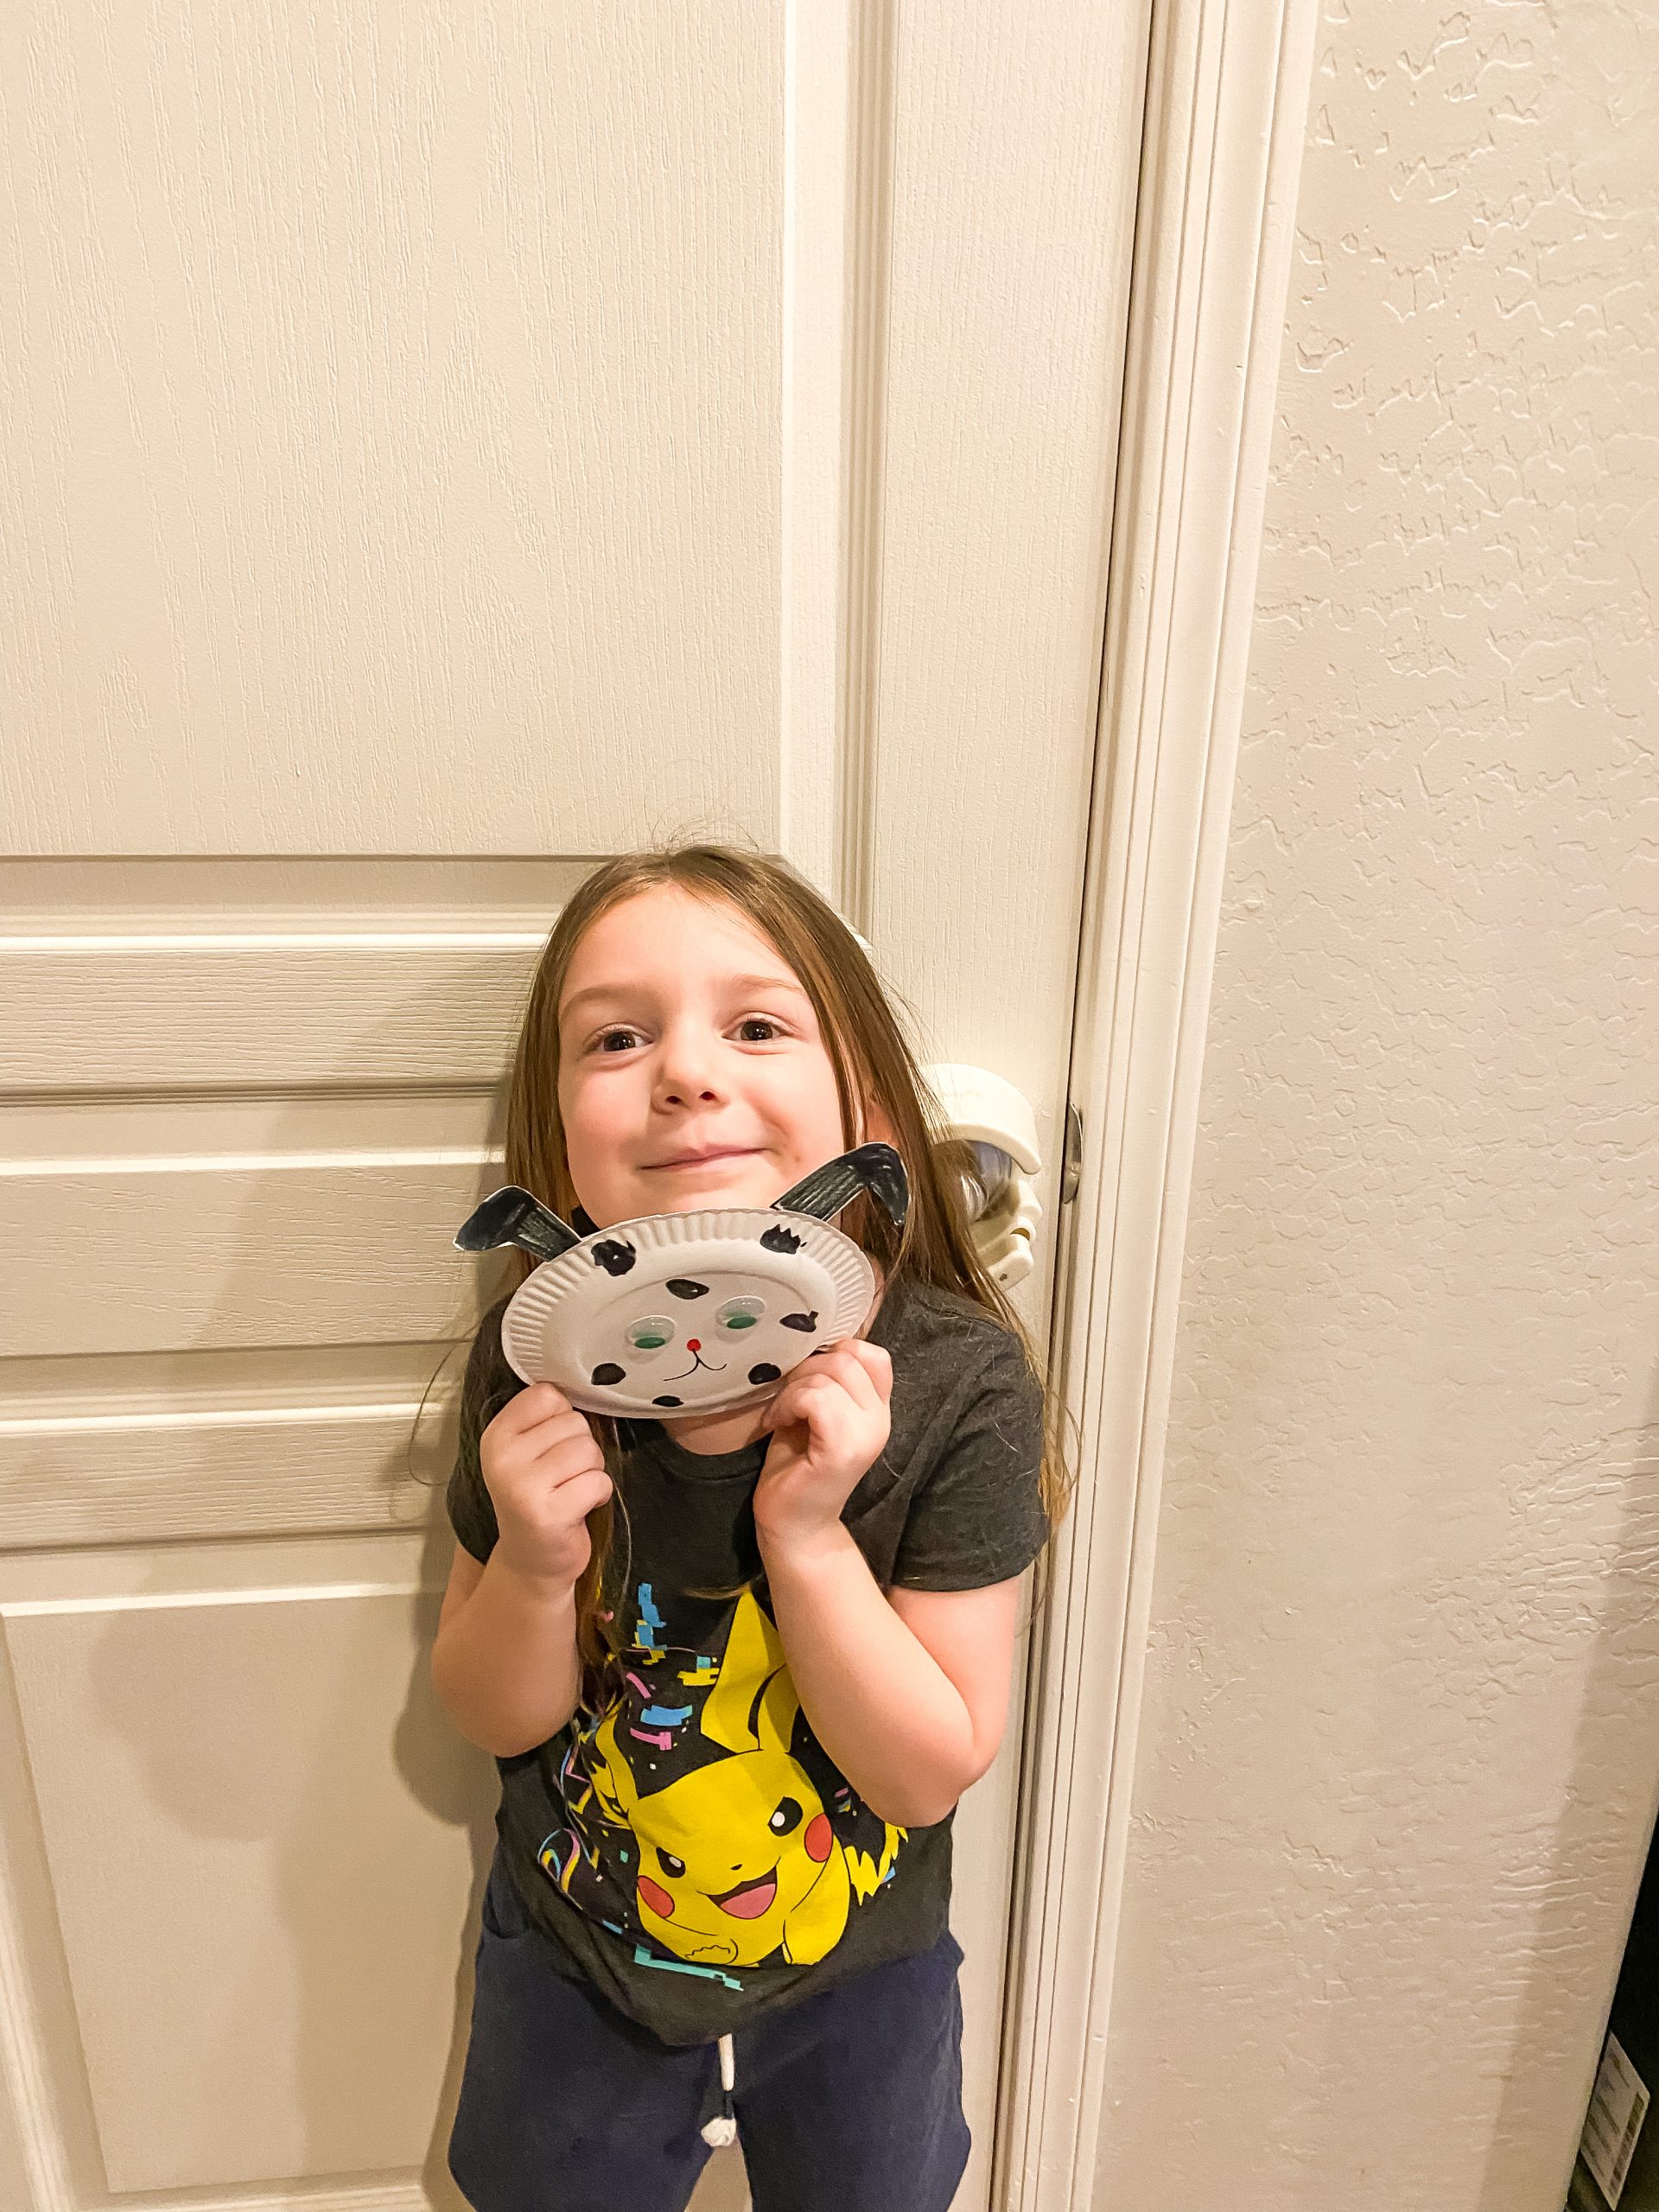 4 year old girl holding up a homemade craft of a Dalmatian made out of a paper plate